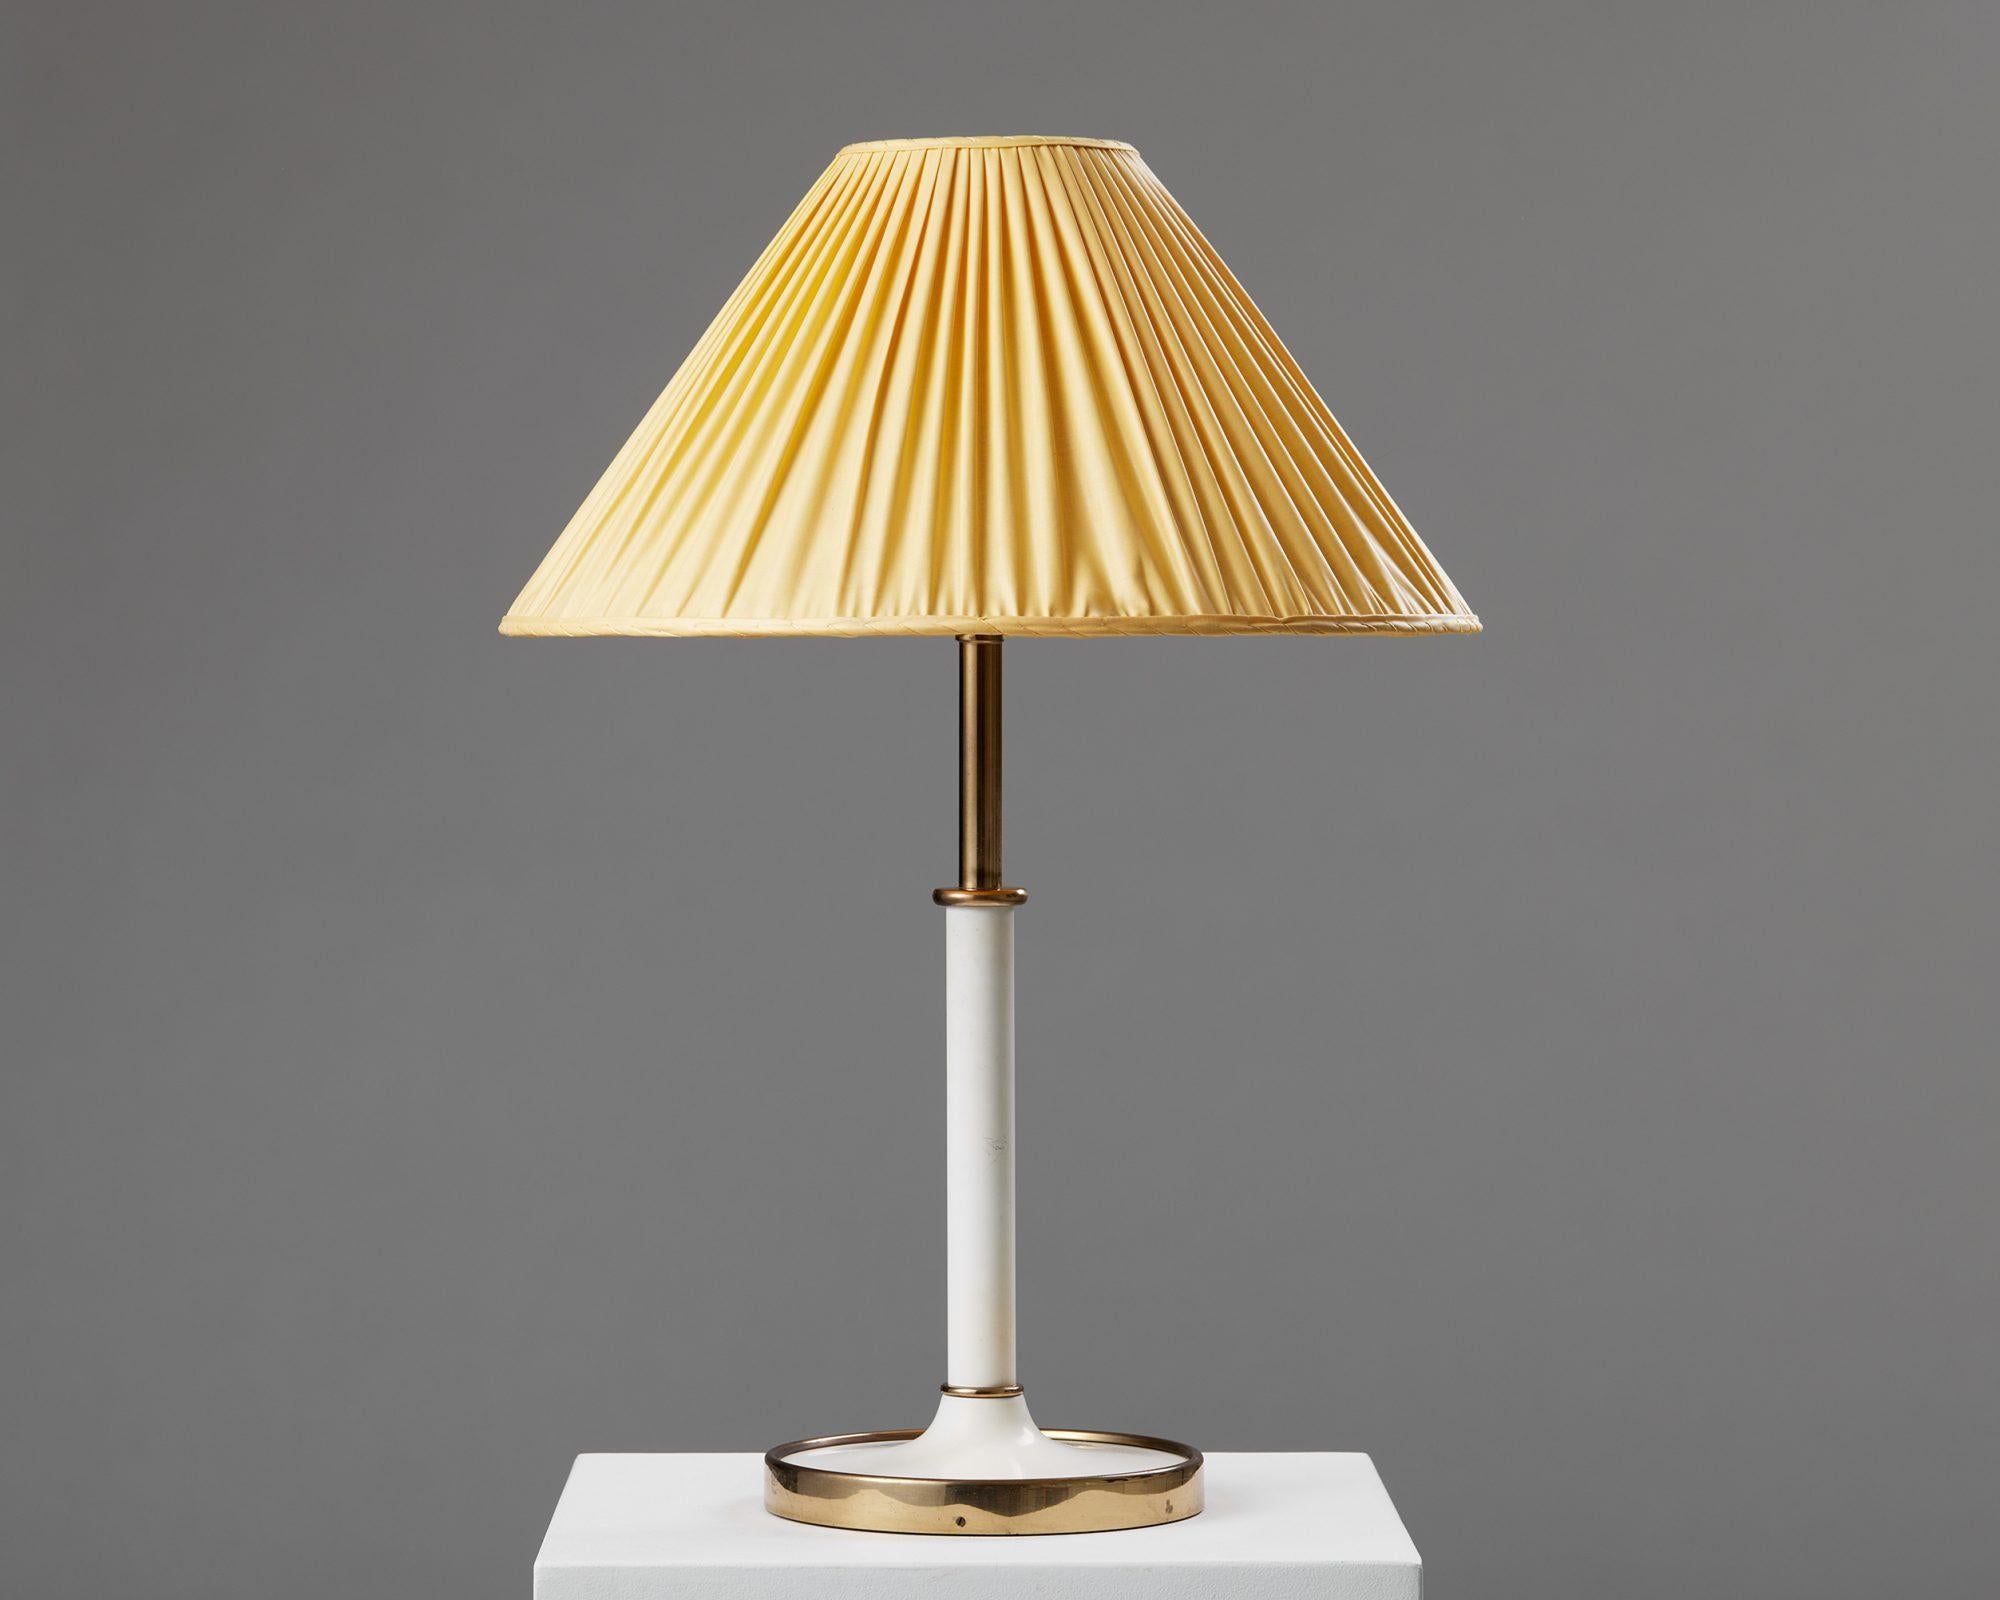 Table lamp model 2466 designed by Josef Frank for Svenskt Tenn,
Sweden, 1950s.

Brass with fabric shade.

Stamped.

An understated and timeless design, the model 2466 by Josef Frank is found in both a table lamp and floor lamp silhouette. The